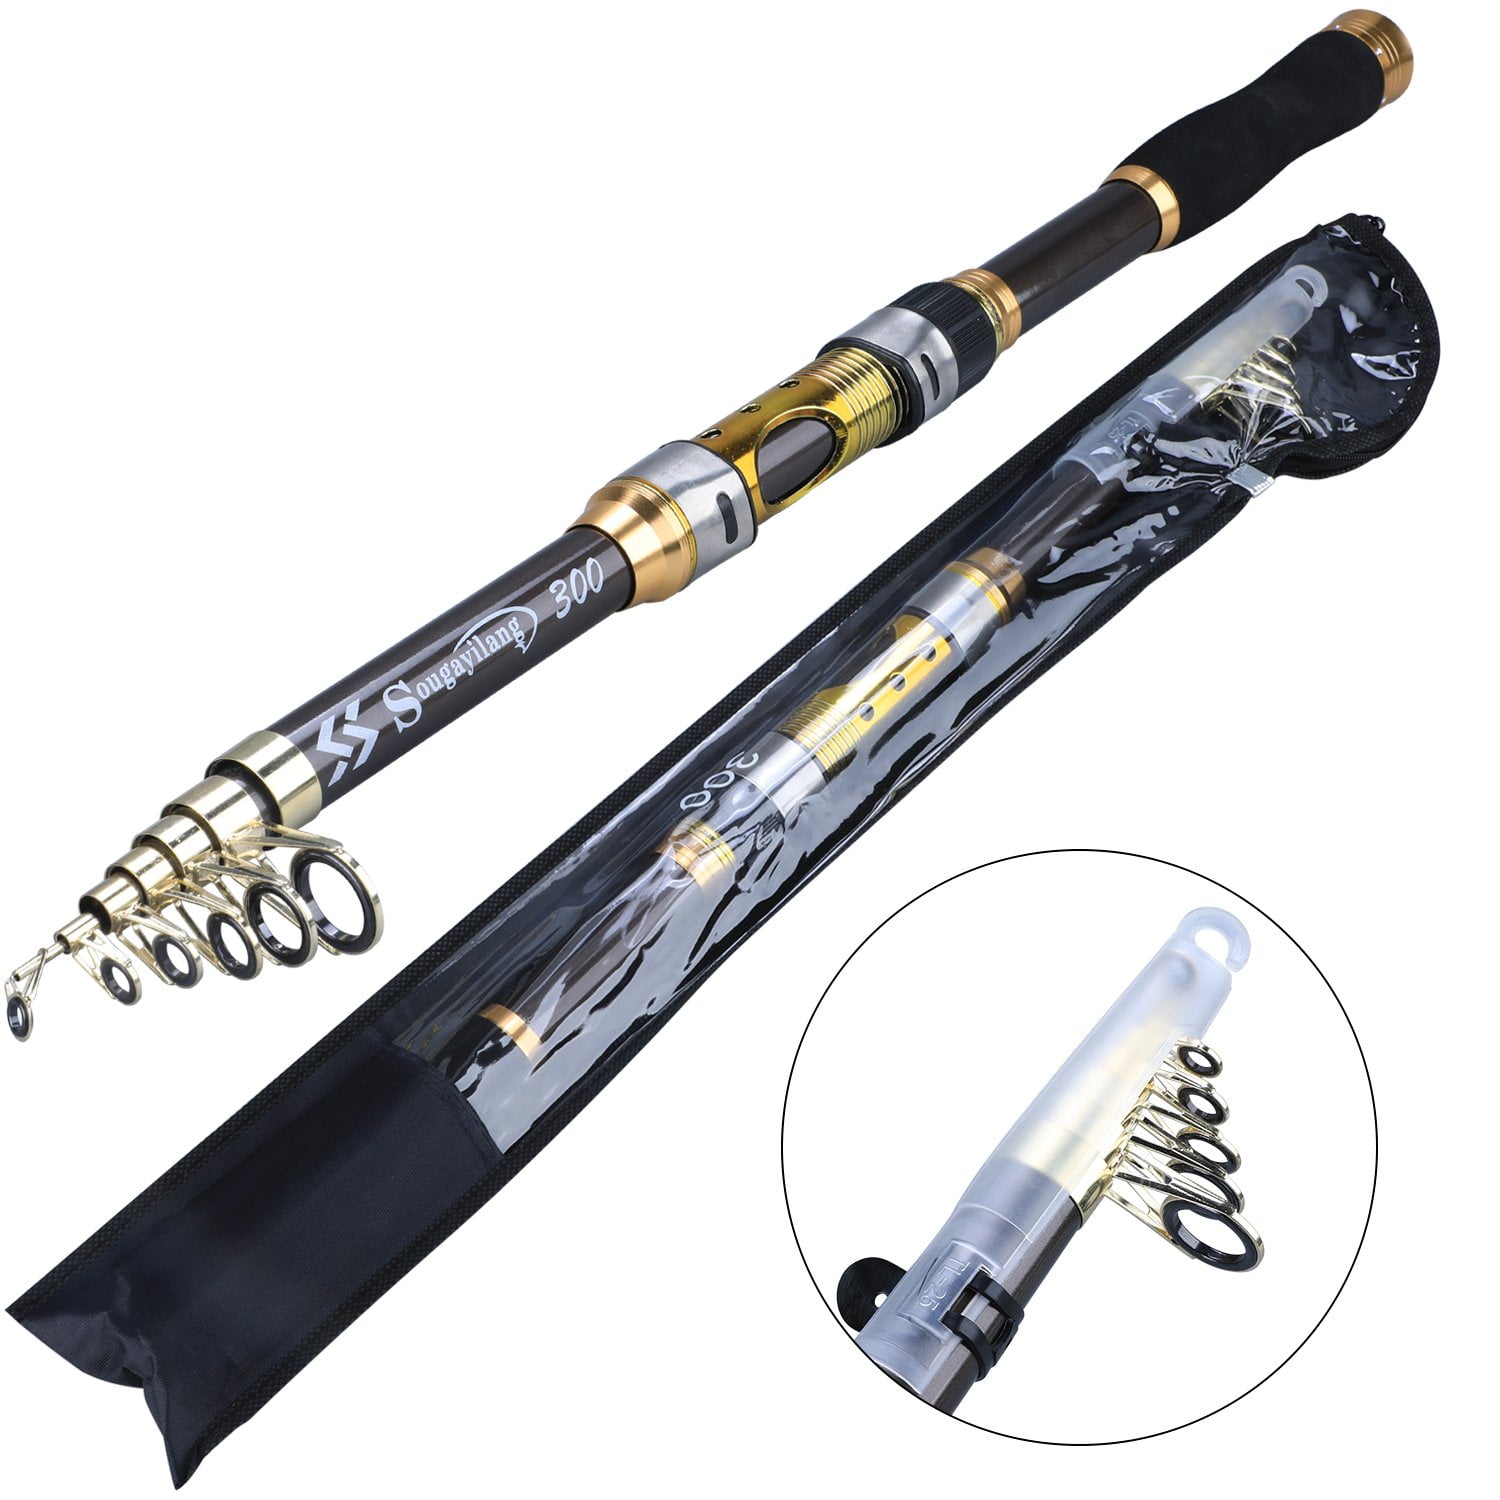 2.1m-3.6m Extendable Spinning Fishing Rod Carbon Trout Carp Telescopic Pole Lure 